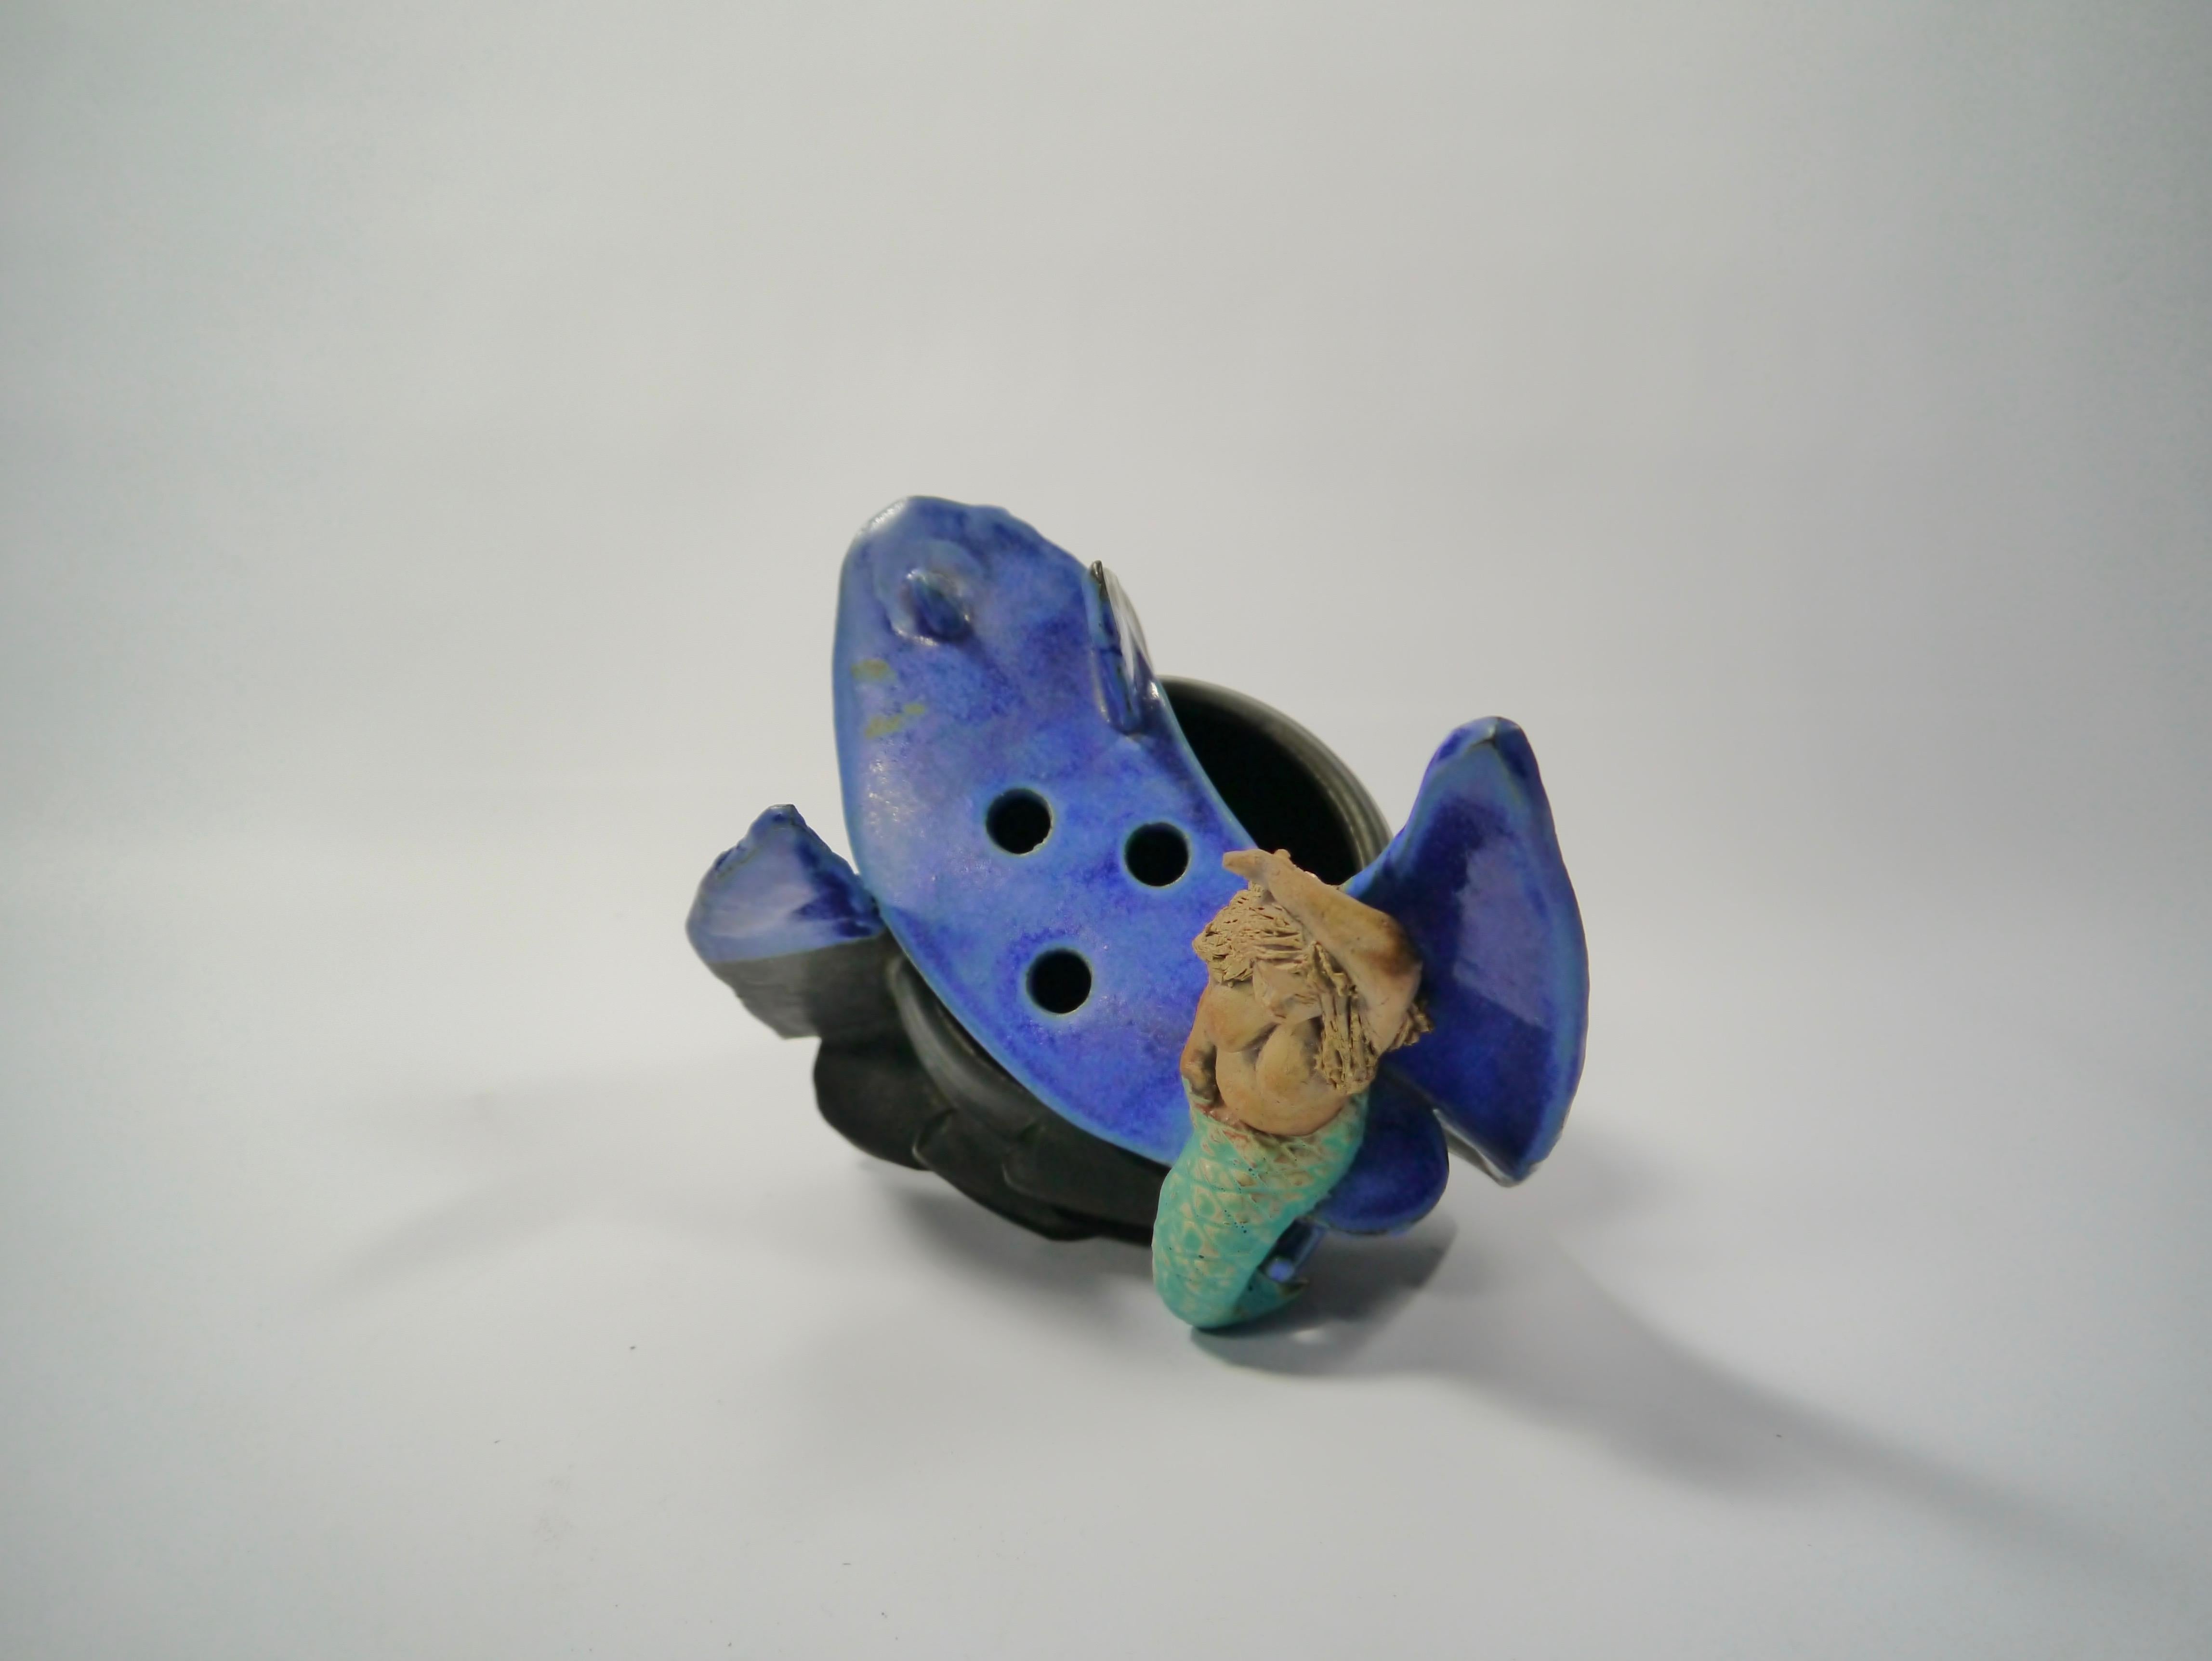 Glazed Naive Ceramic Mermaid Sculpture / Vase by Rein Follestad, Norway, 1990s For Sale